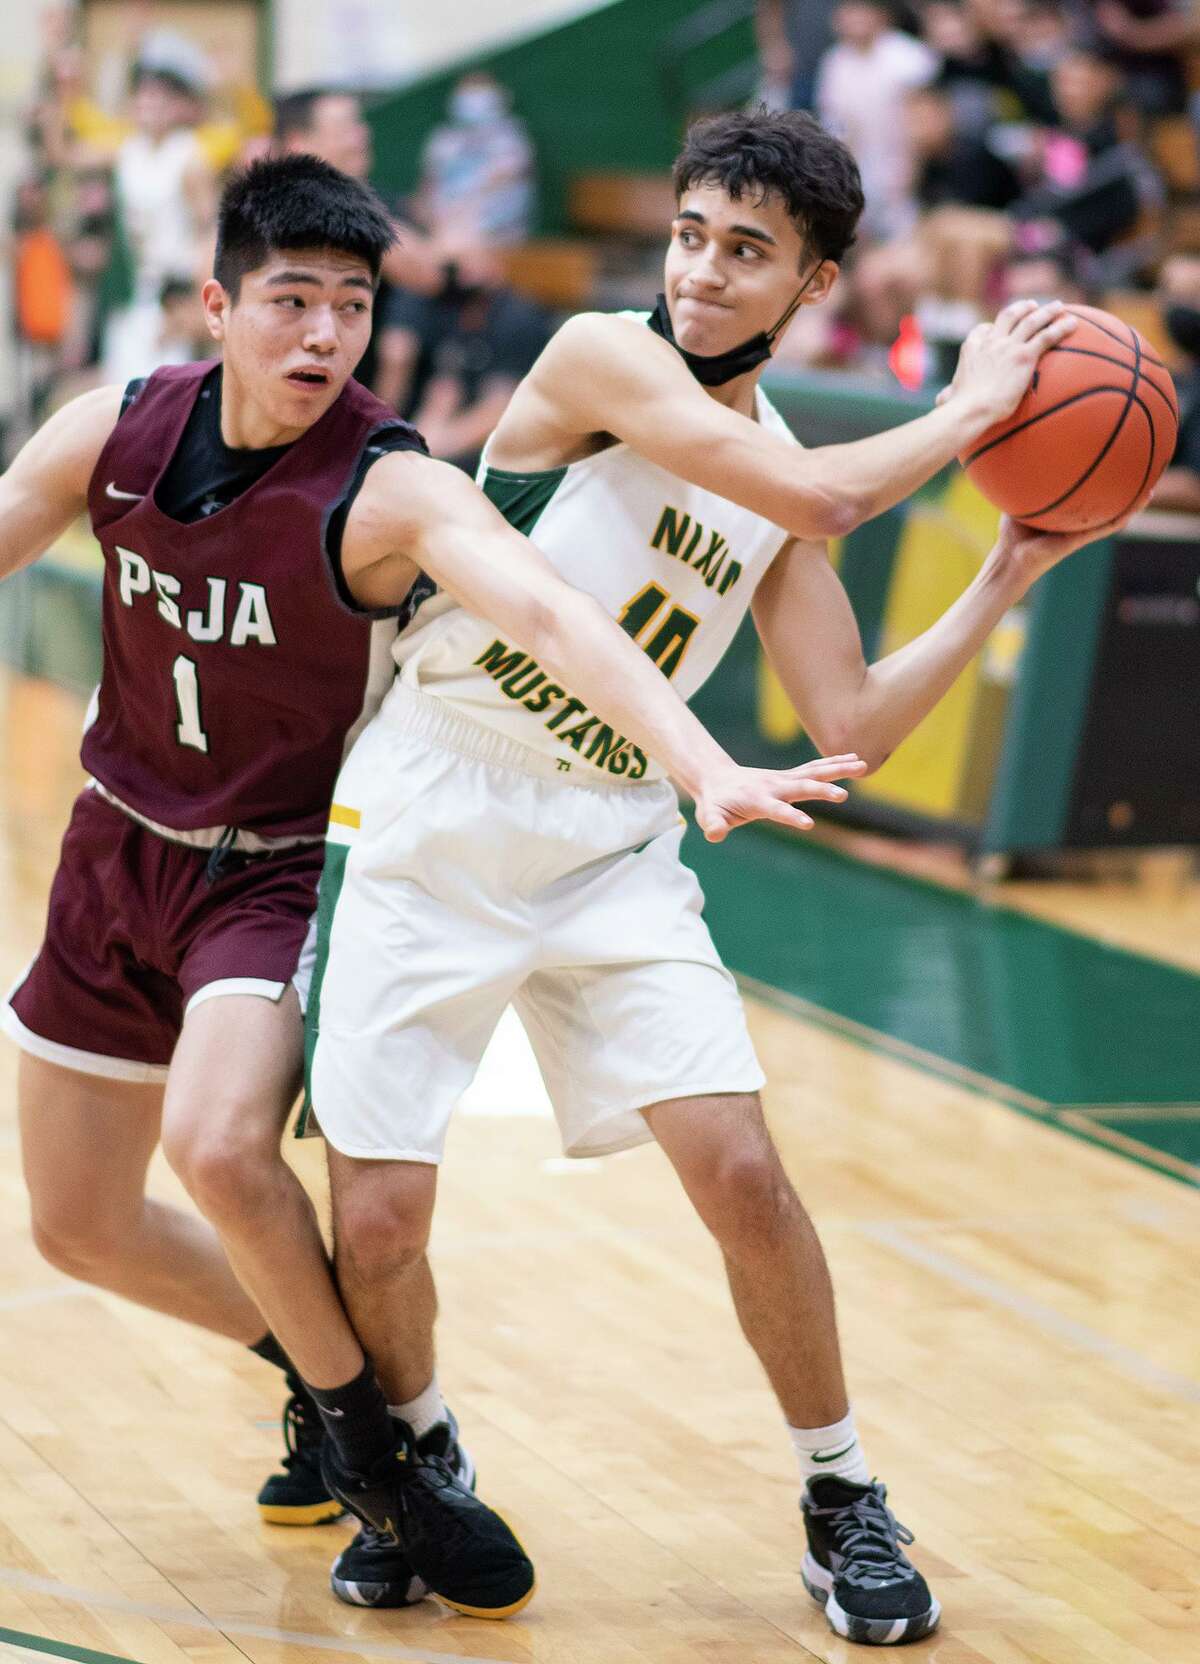 In this file photo Nixon High School’s Richard Garcia keeps the ball away during a game against PSJA High School.